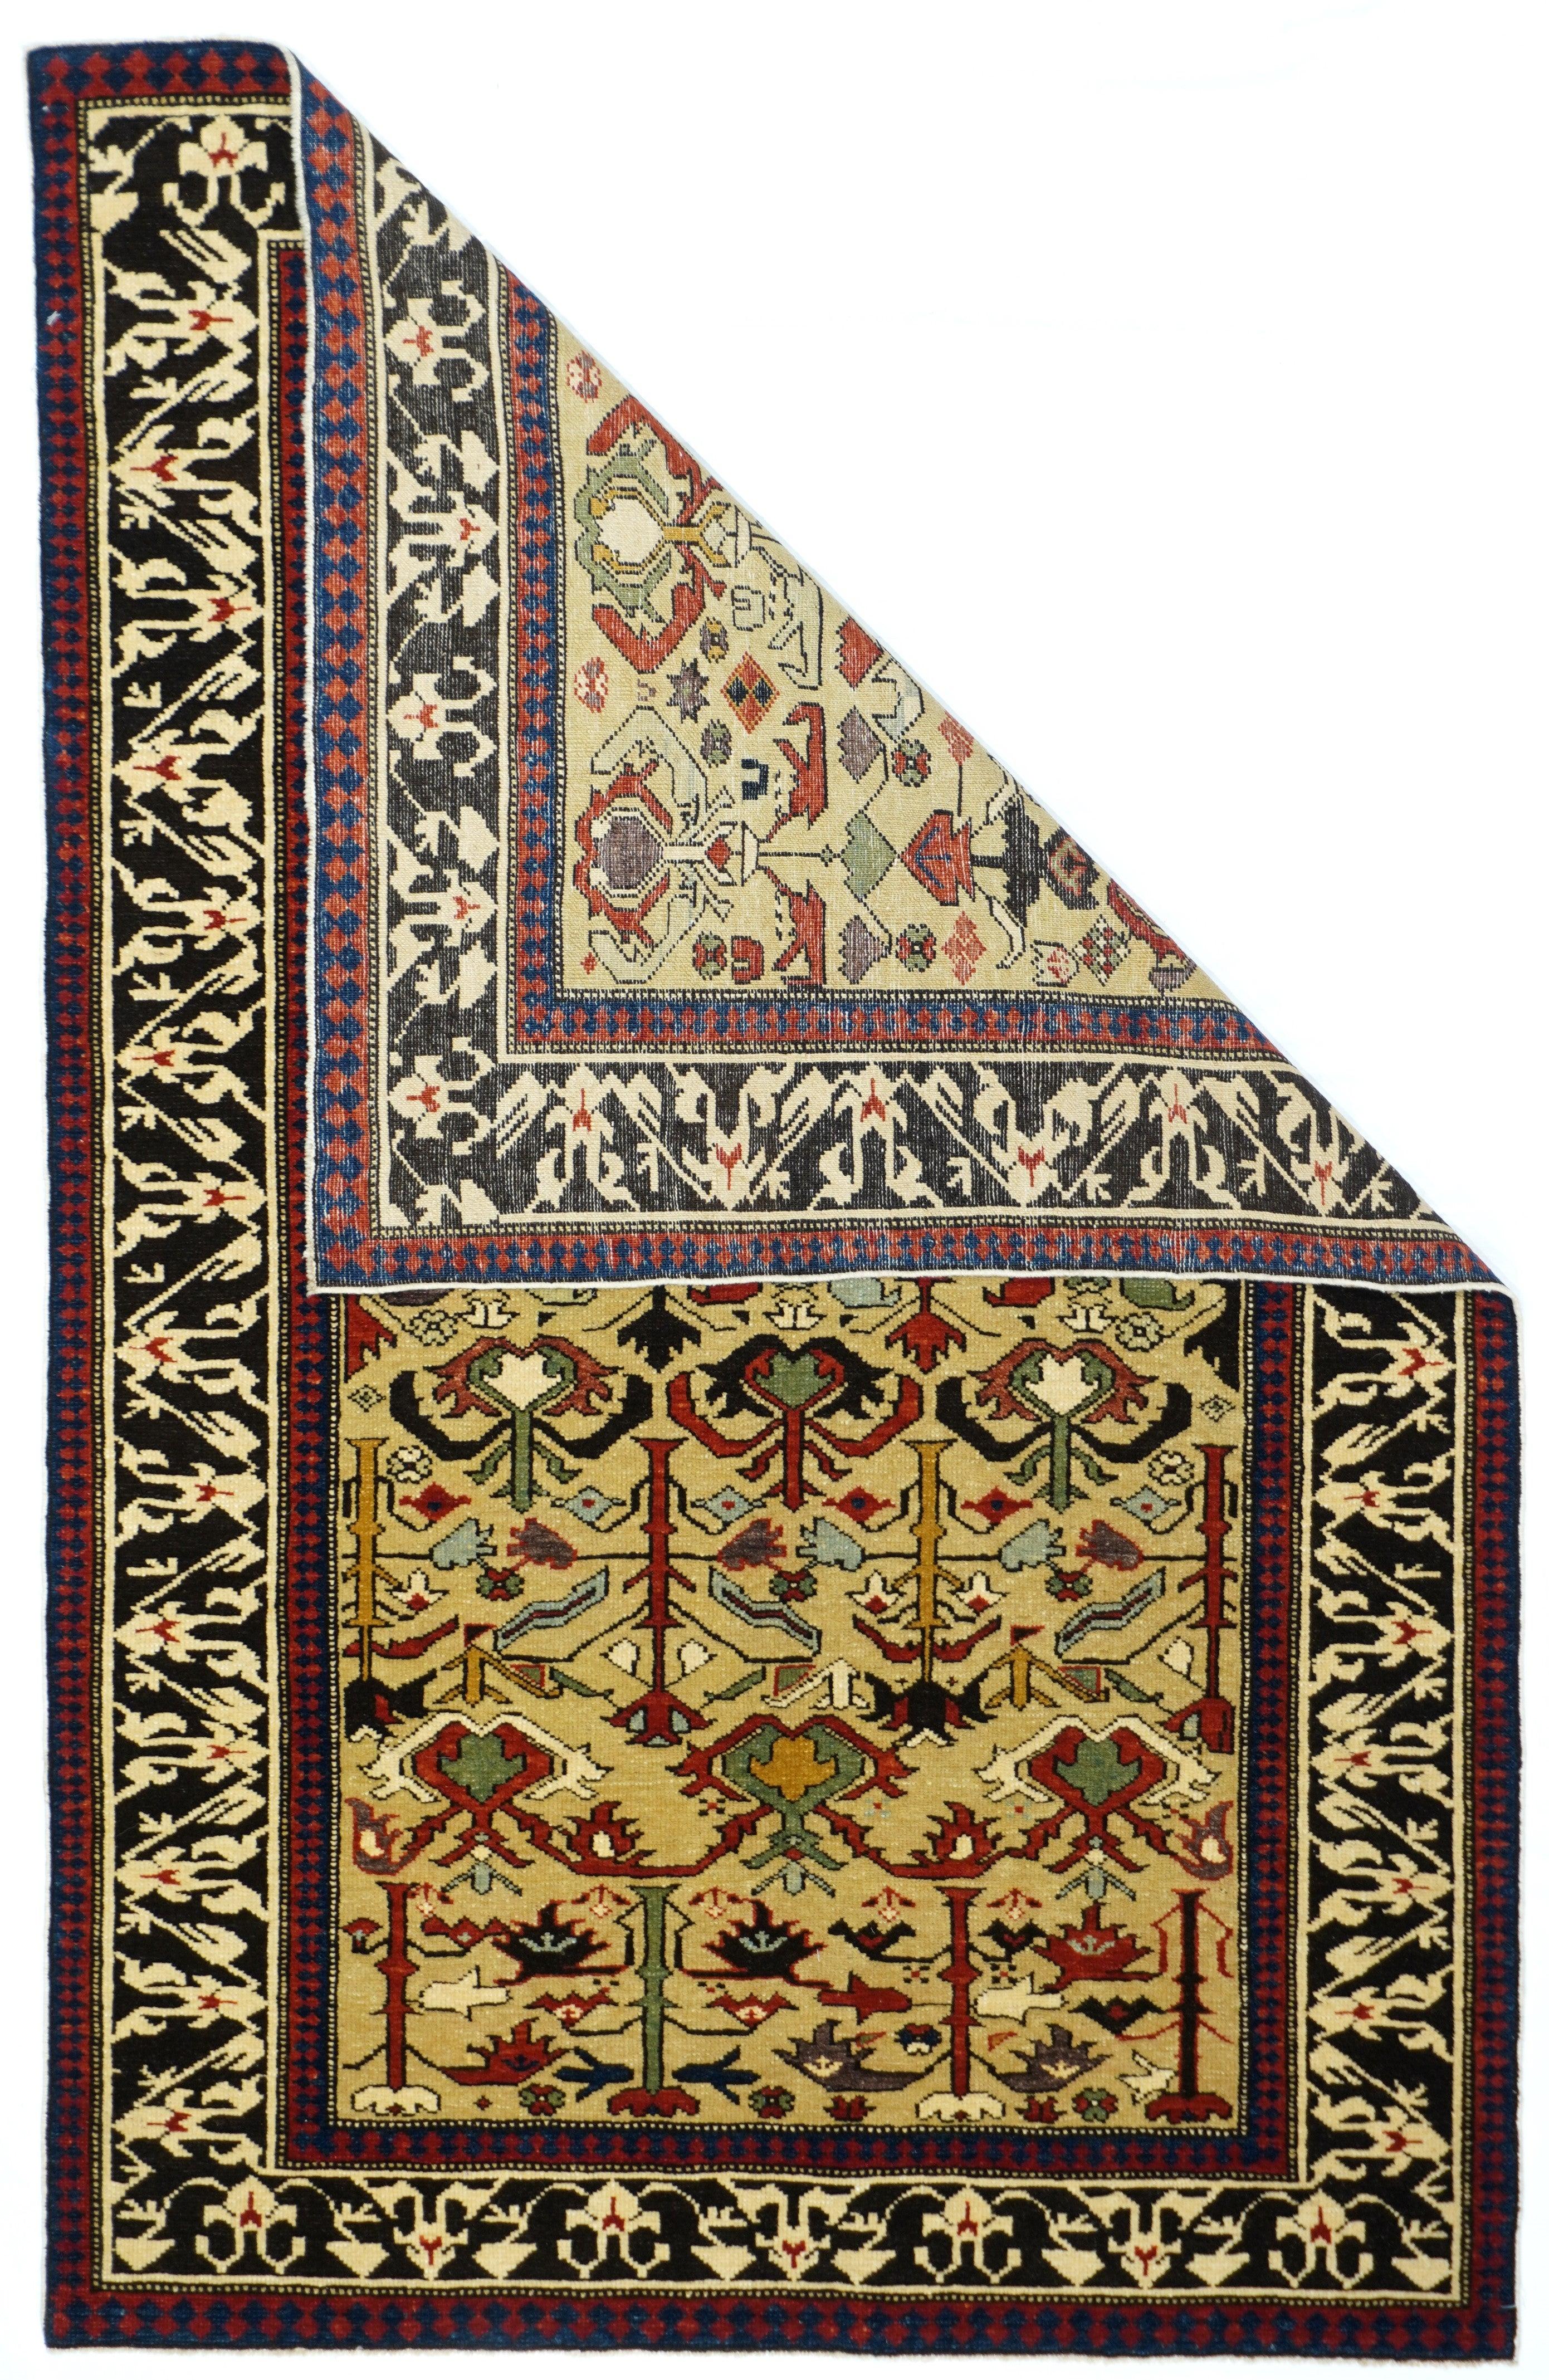 Vintage Shirvan rug 3'3'' x 5'10''. Vintage Shirvan rug¬†3'3'' x 5'10''. The complex textile-like floral pattern has opened up slightly, exposing more of the straw ground with accents in green, rust, deep red and black. No blues. Excellent dark